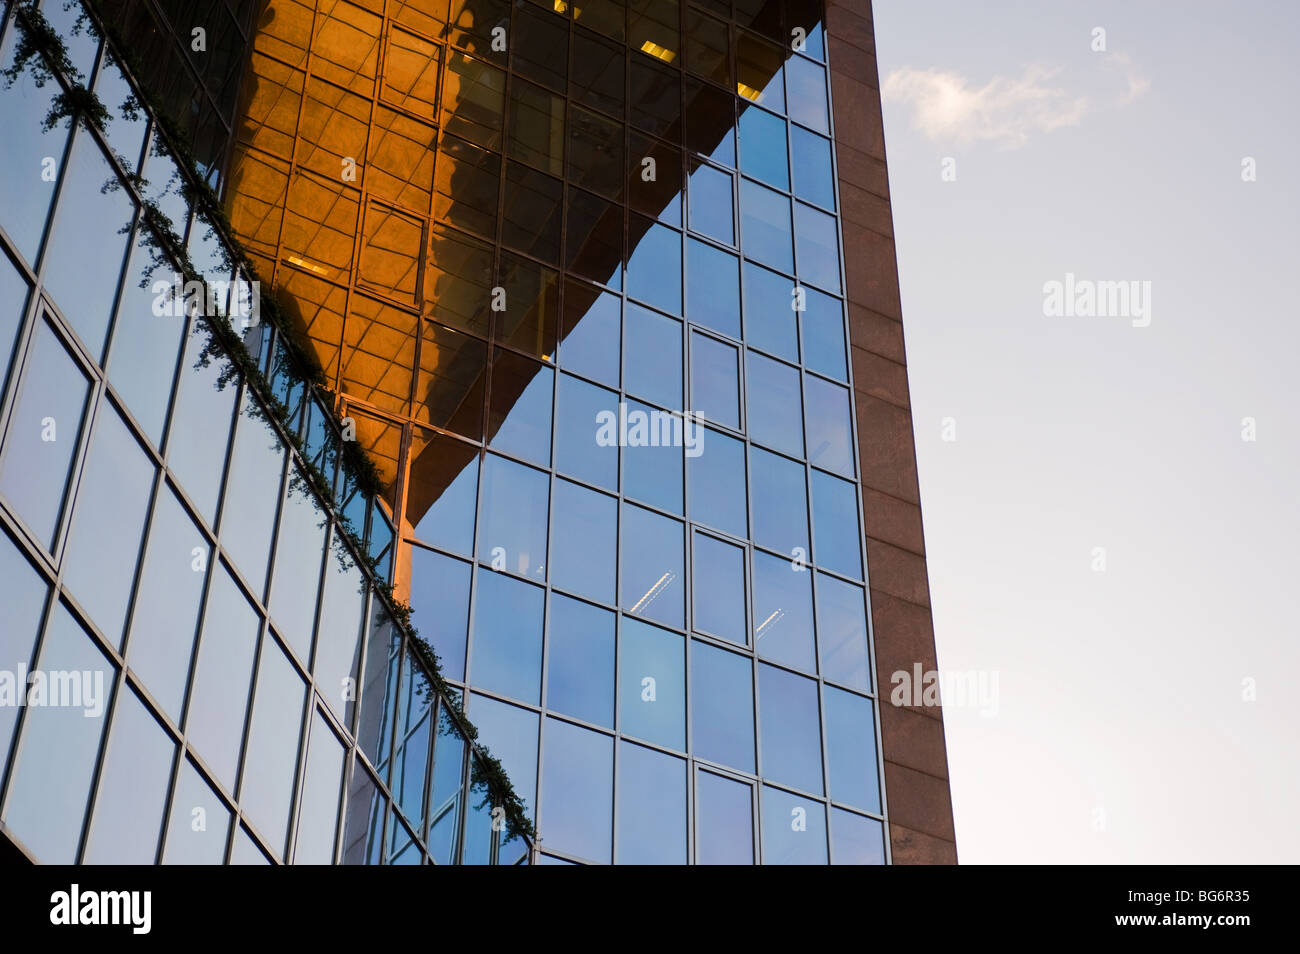 Reflections in the glass walls of a modern office block in London.  Photo by Gordon Scammell Stock Photo